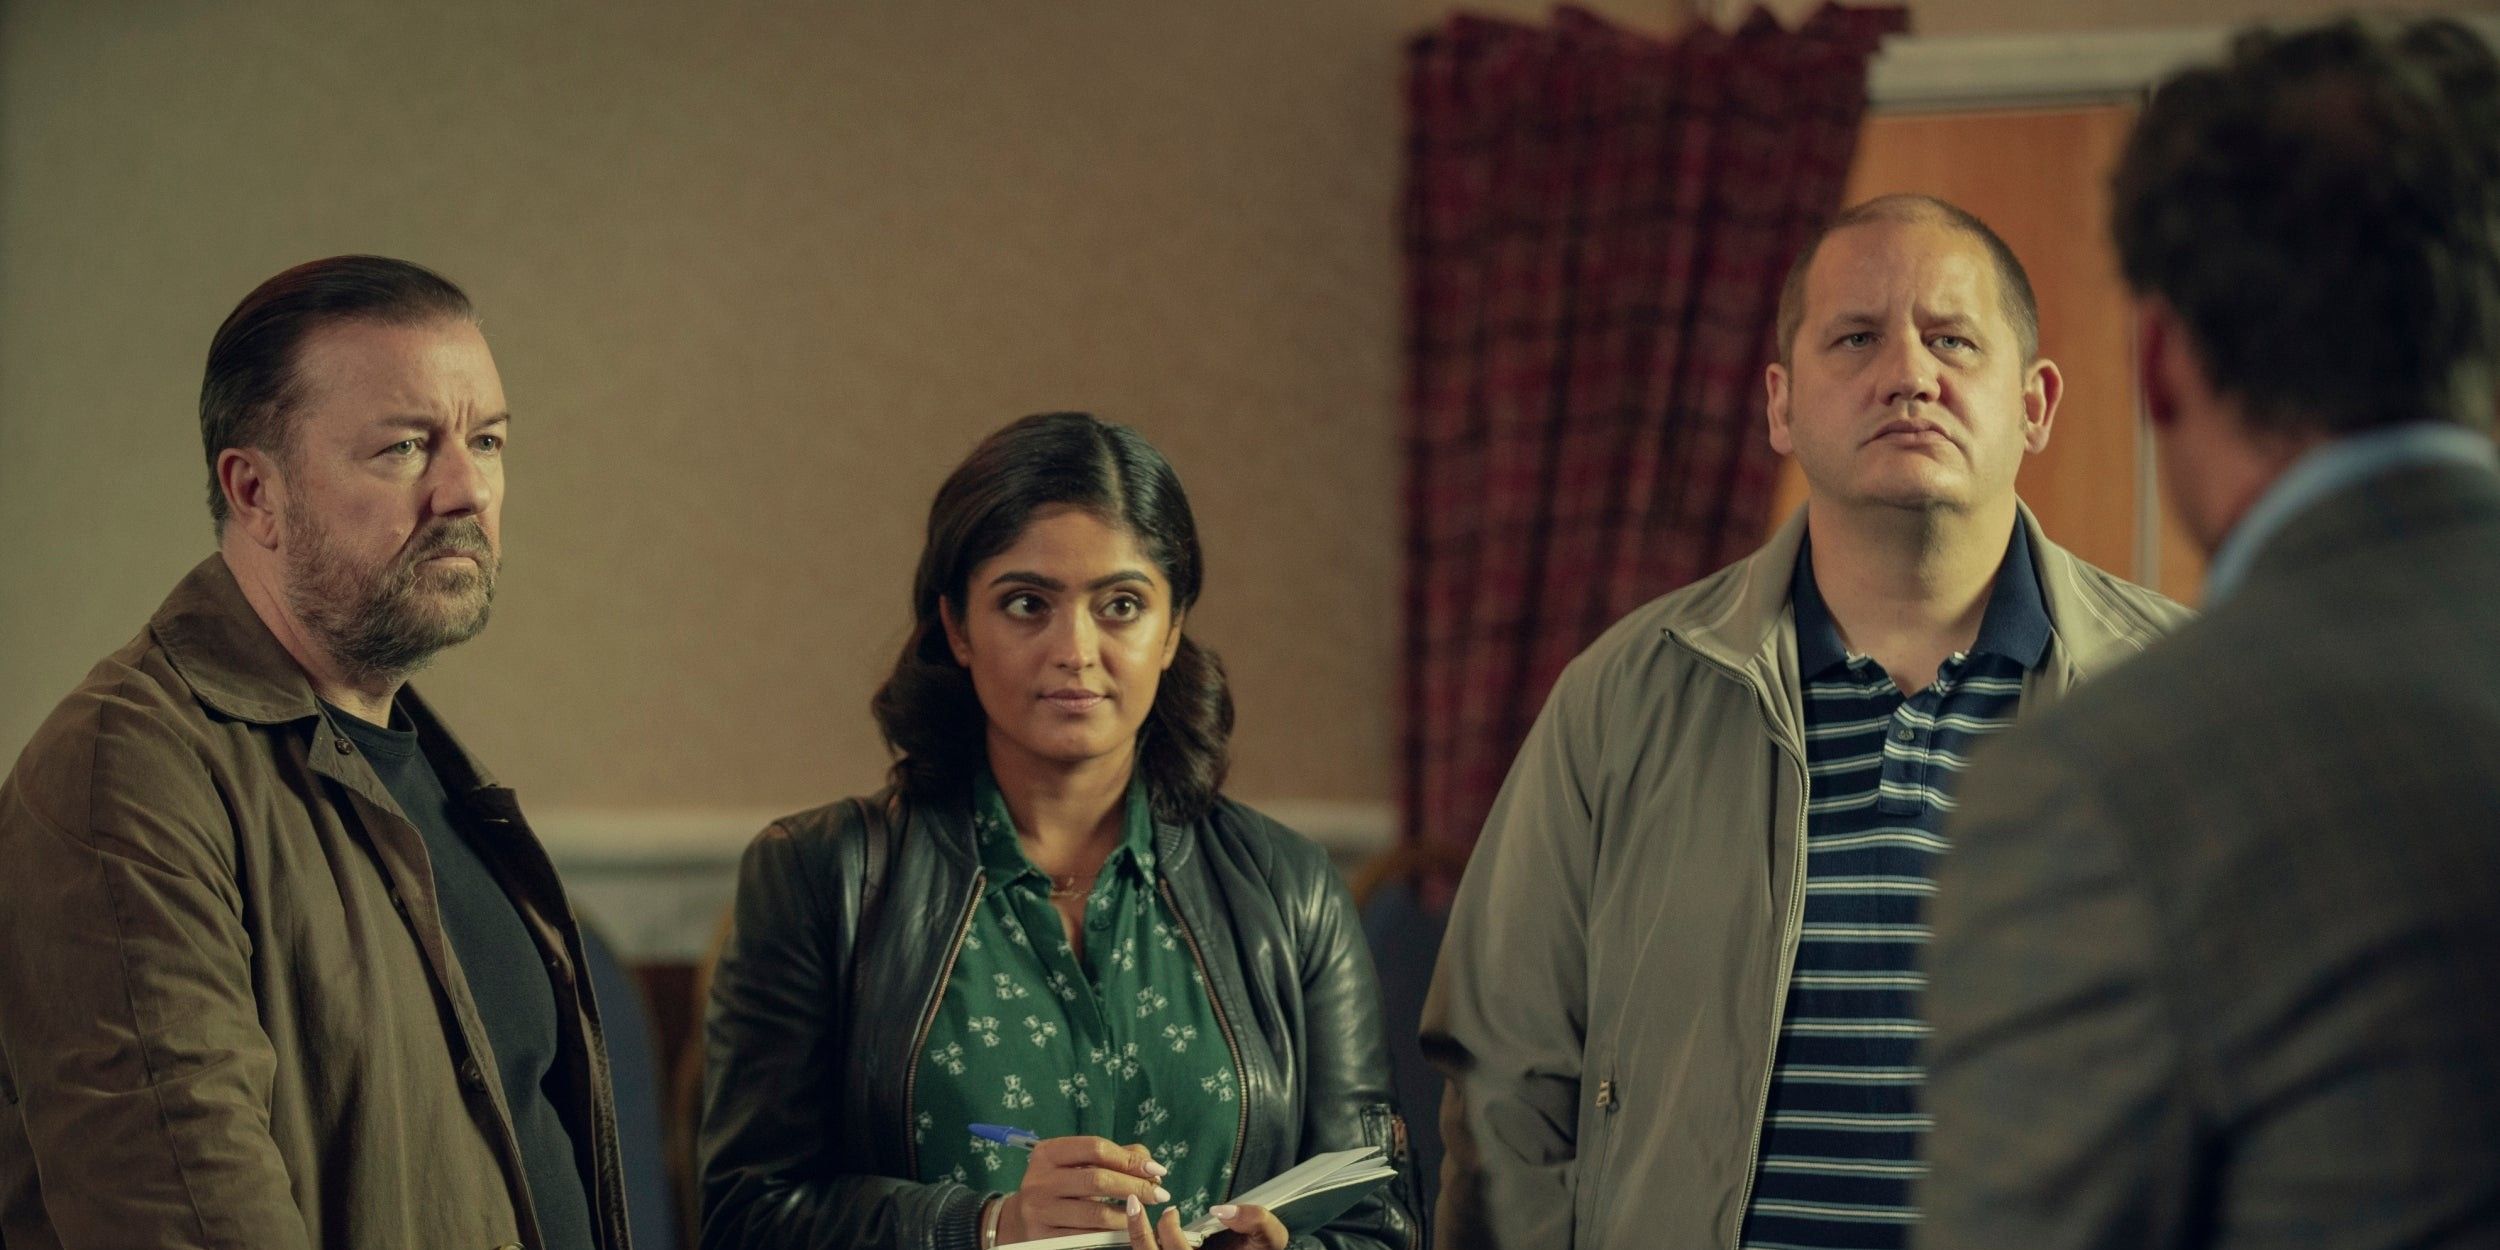 Ricky Gervais as Tony, Mandeep Dhillon as Sandy and Tony Way as Lenny in After Life